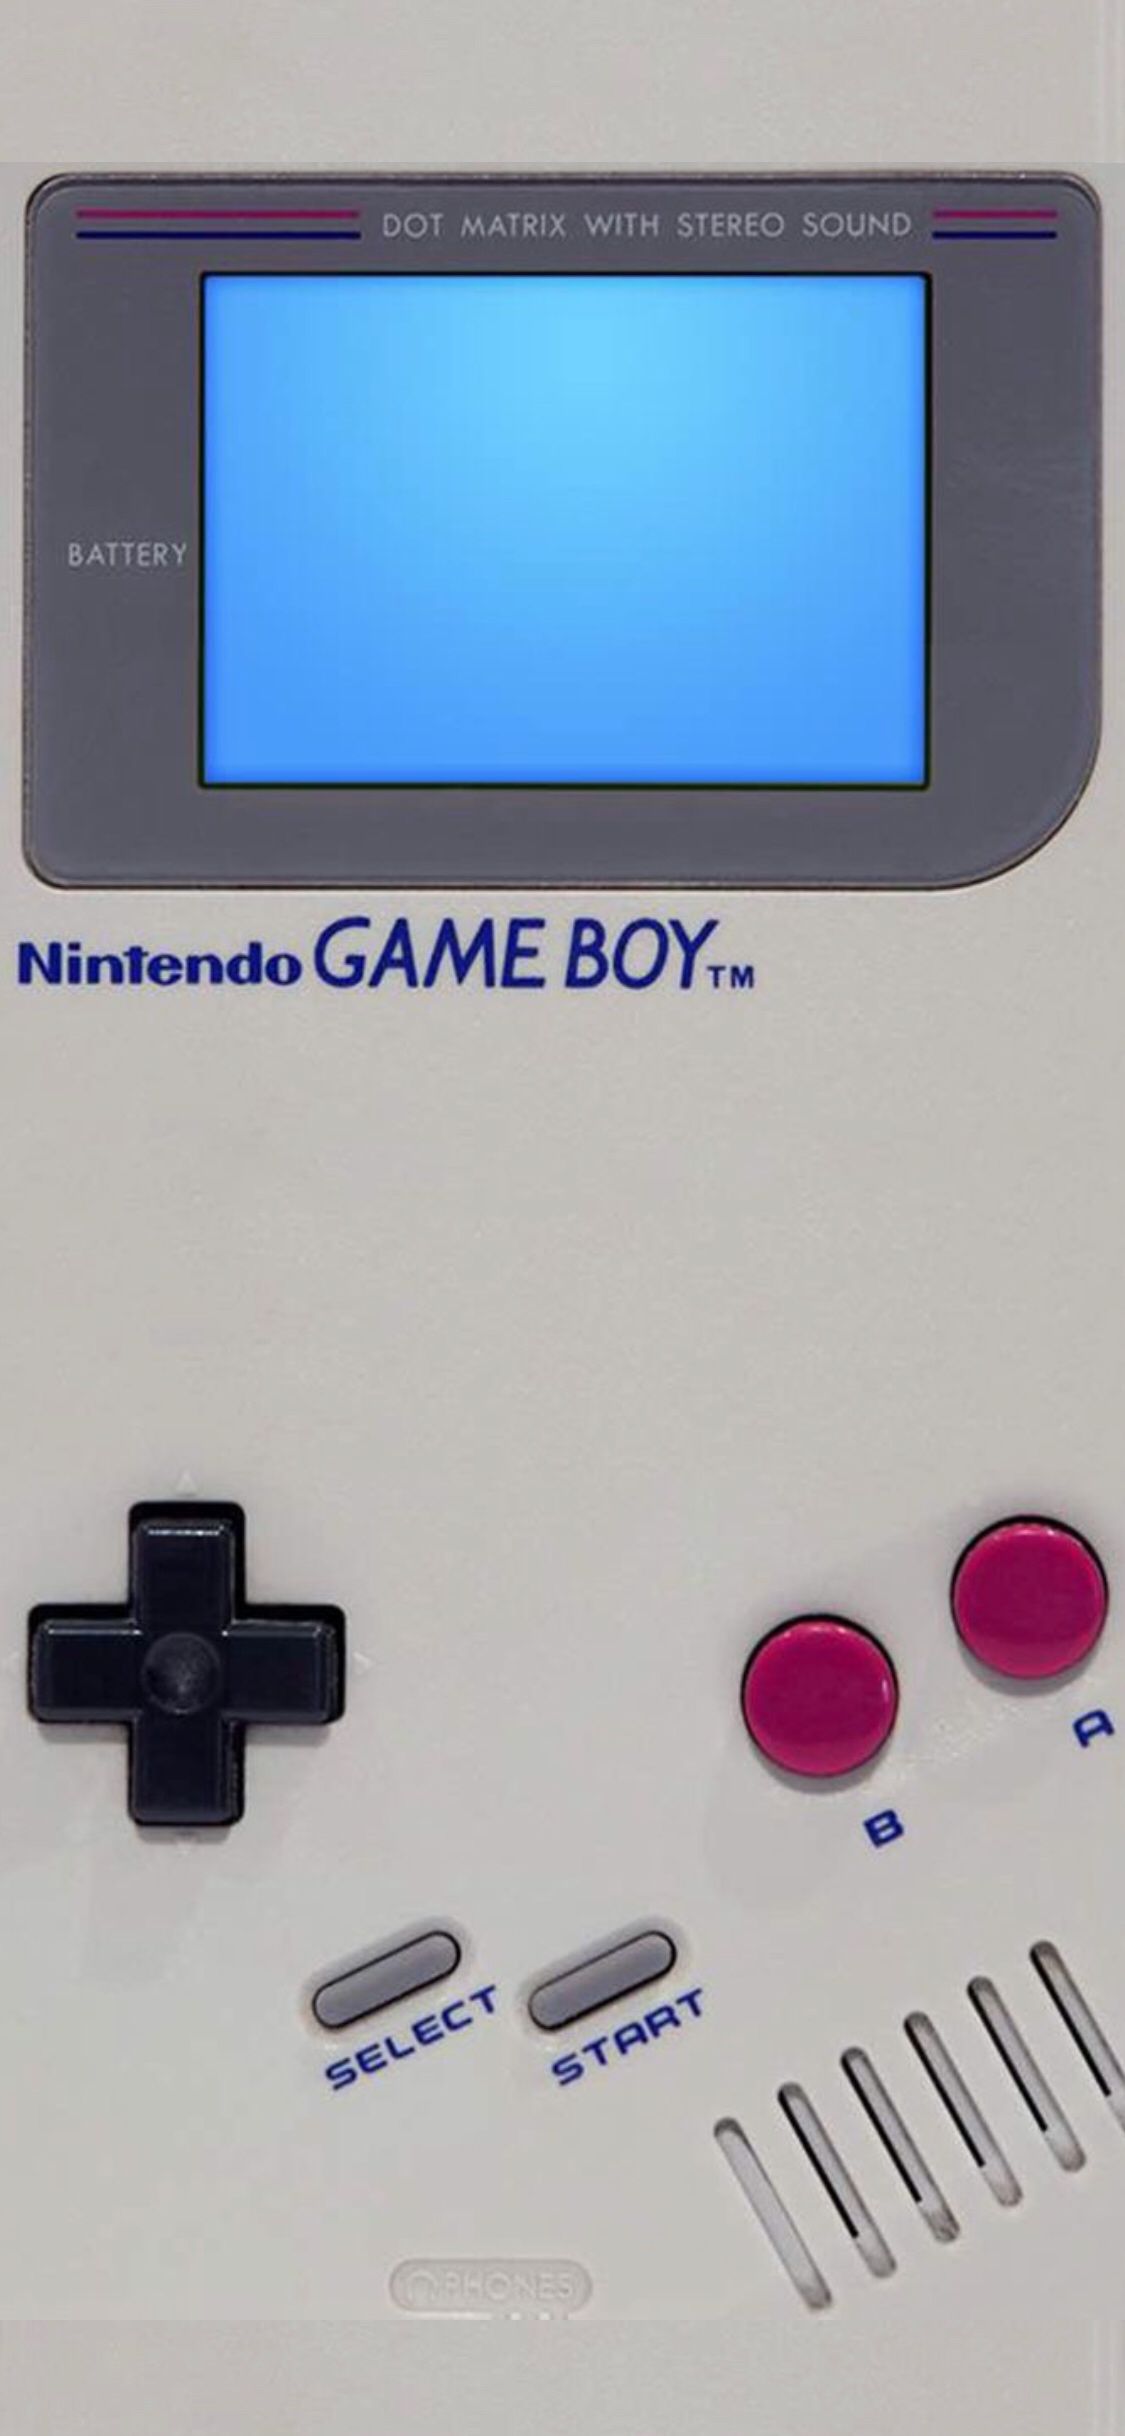 Gameboy Color Iphone Wallpapers Wallpaper Cave